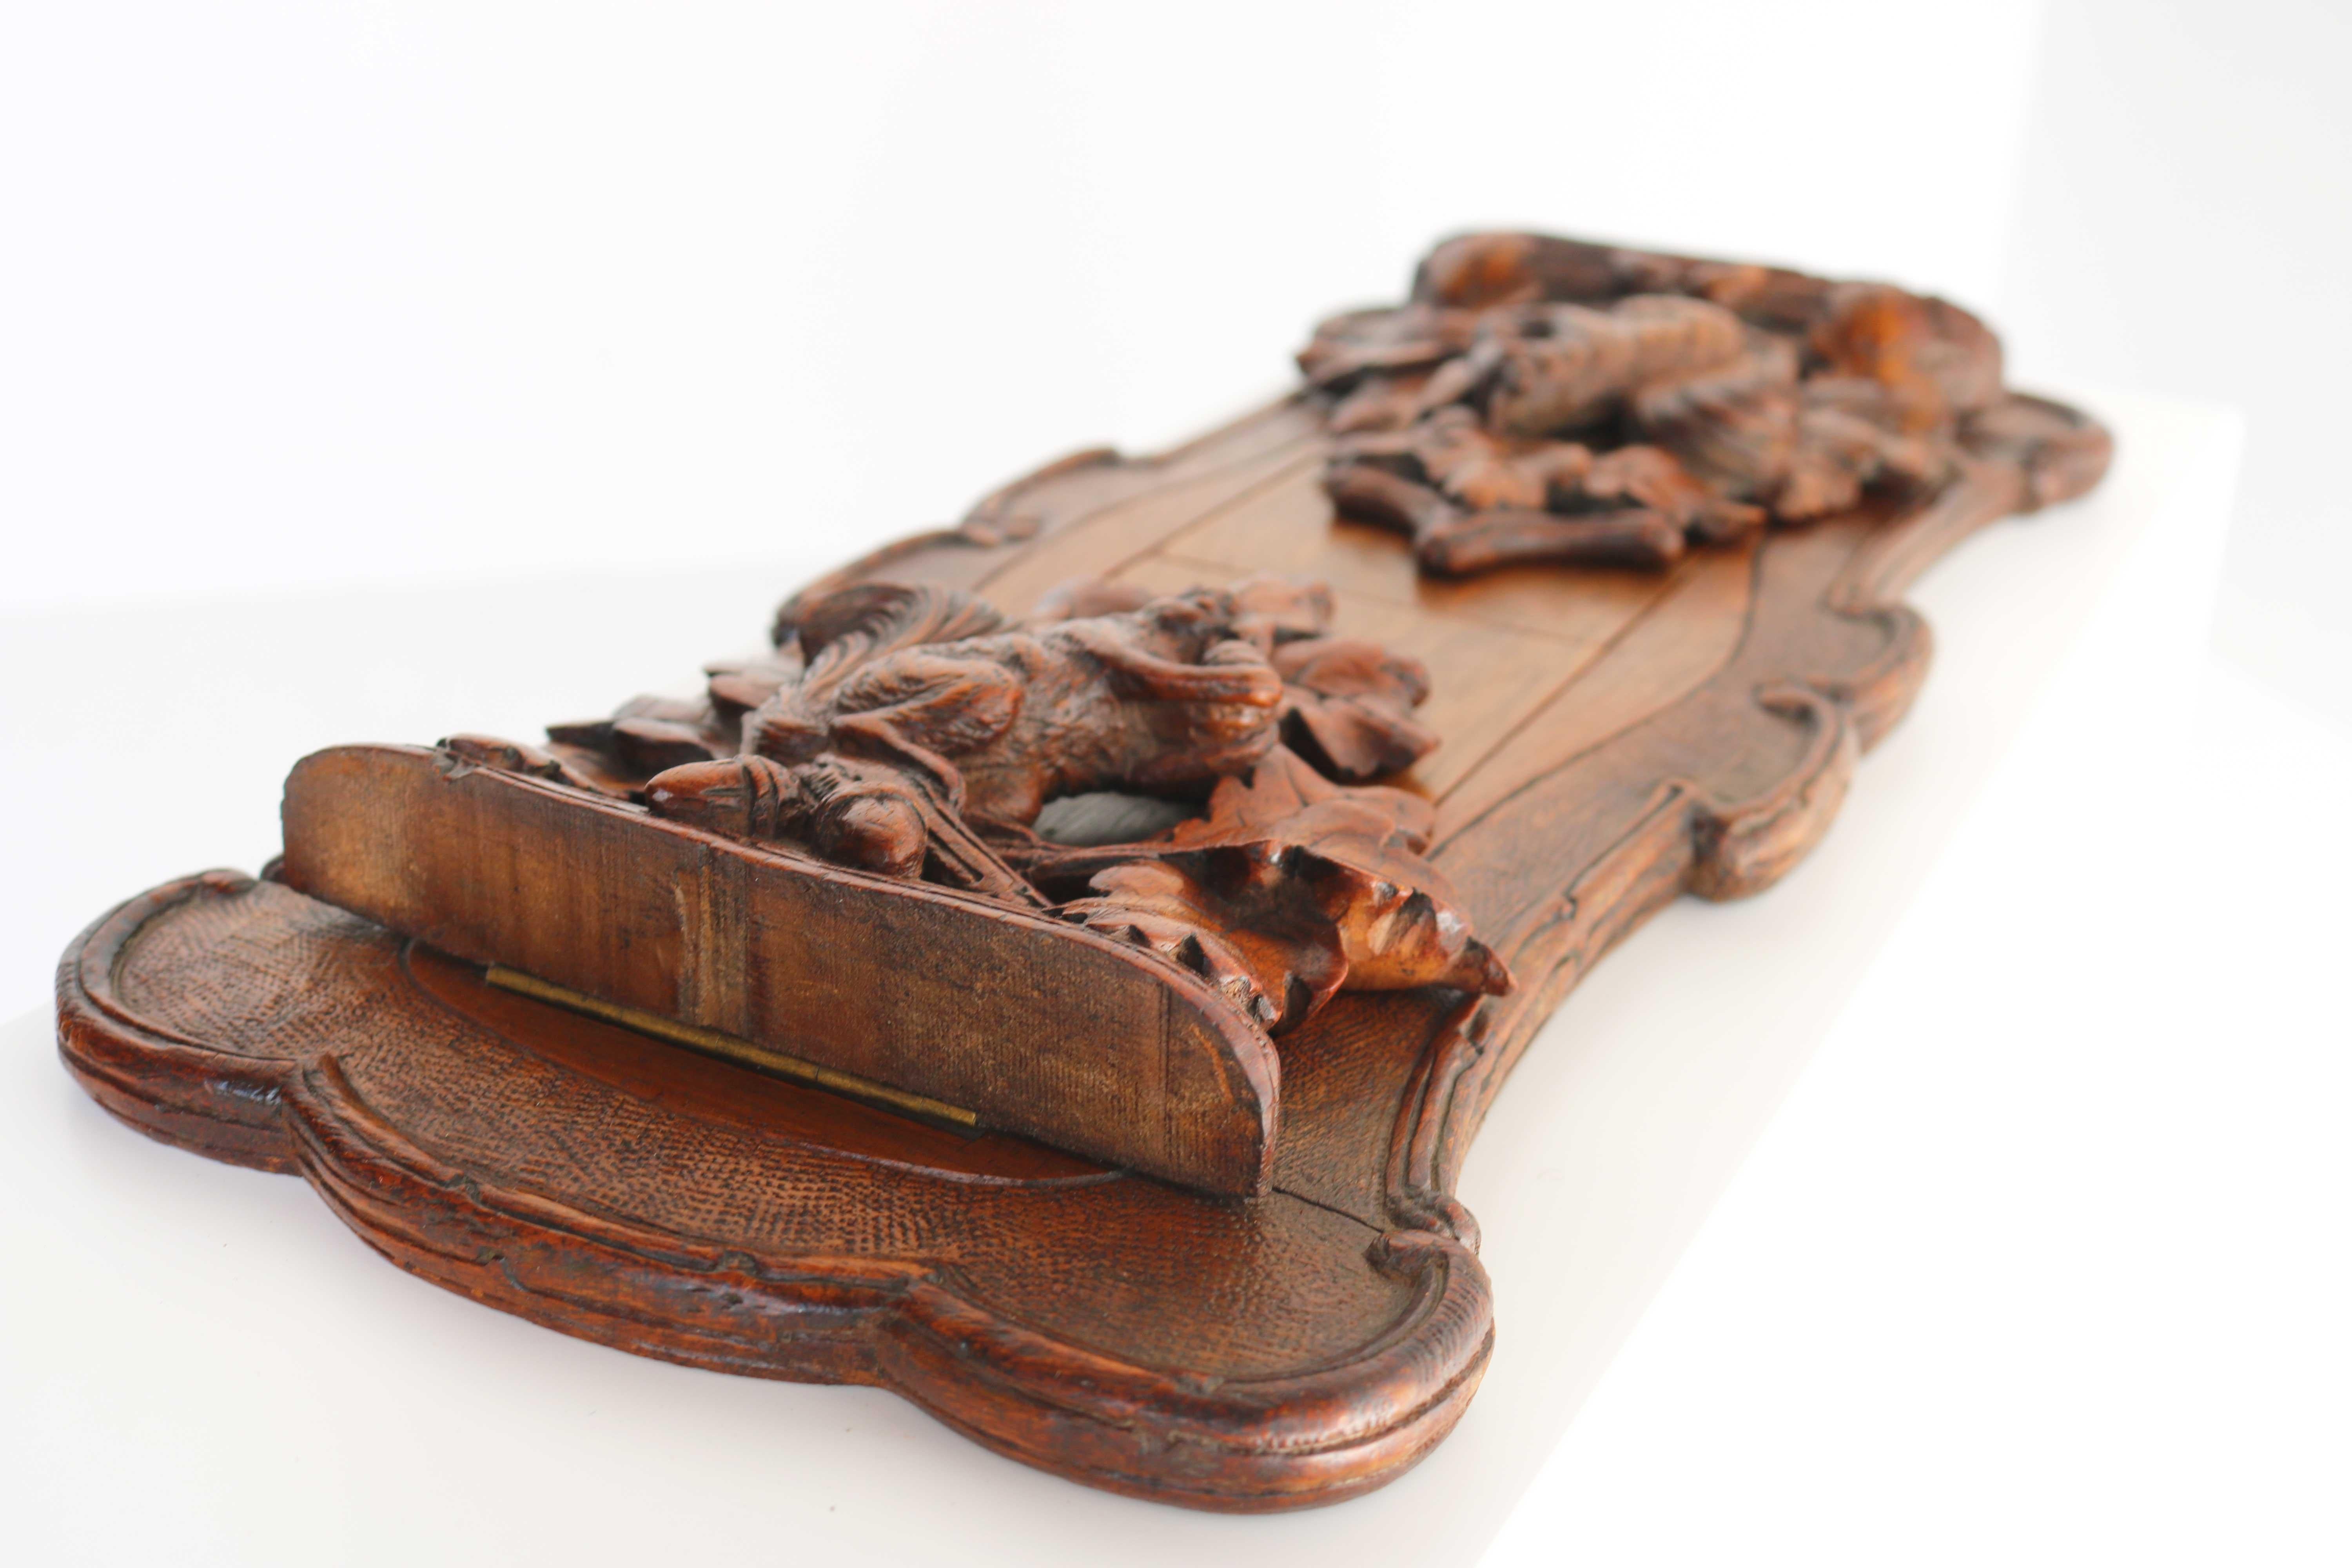 19th Century Black Forest Book Rack, Bookstand, Carved Squirrel Acorn Leaf Bookends, Antique